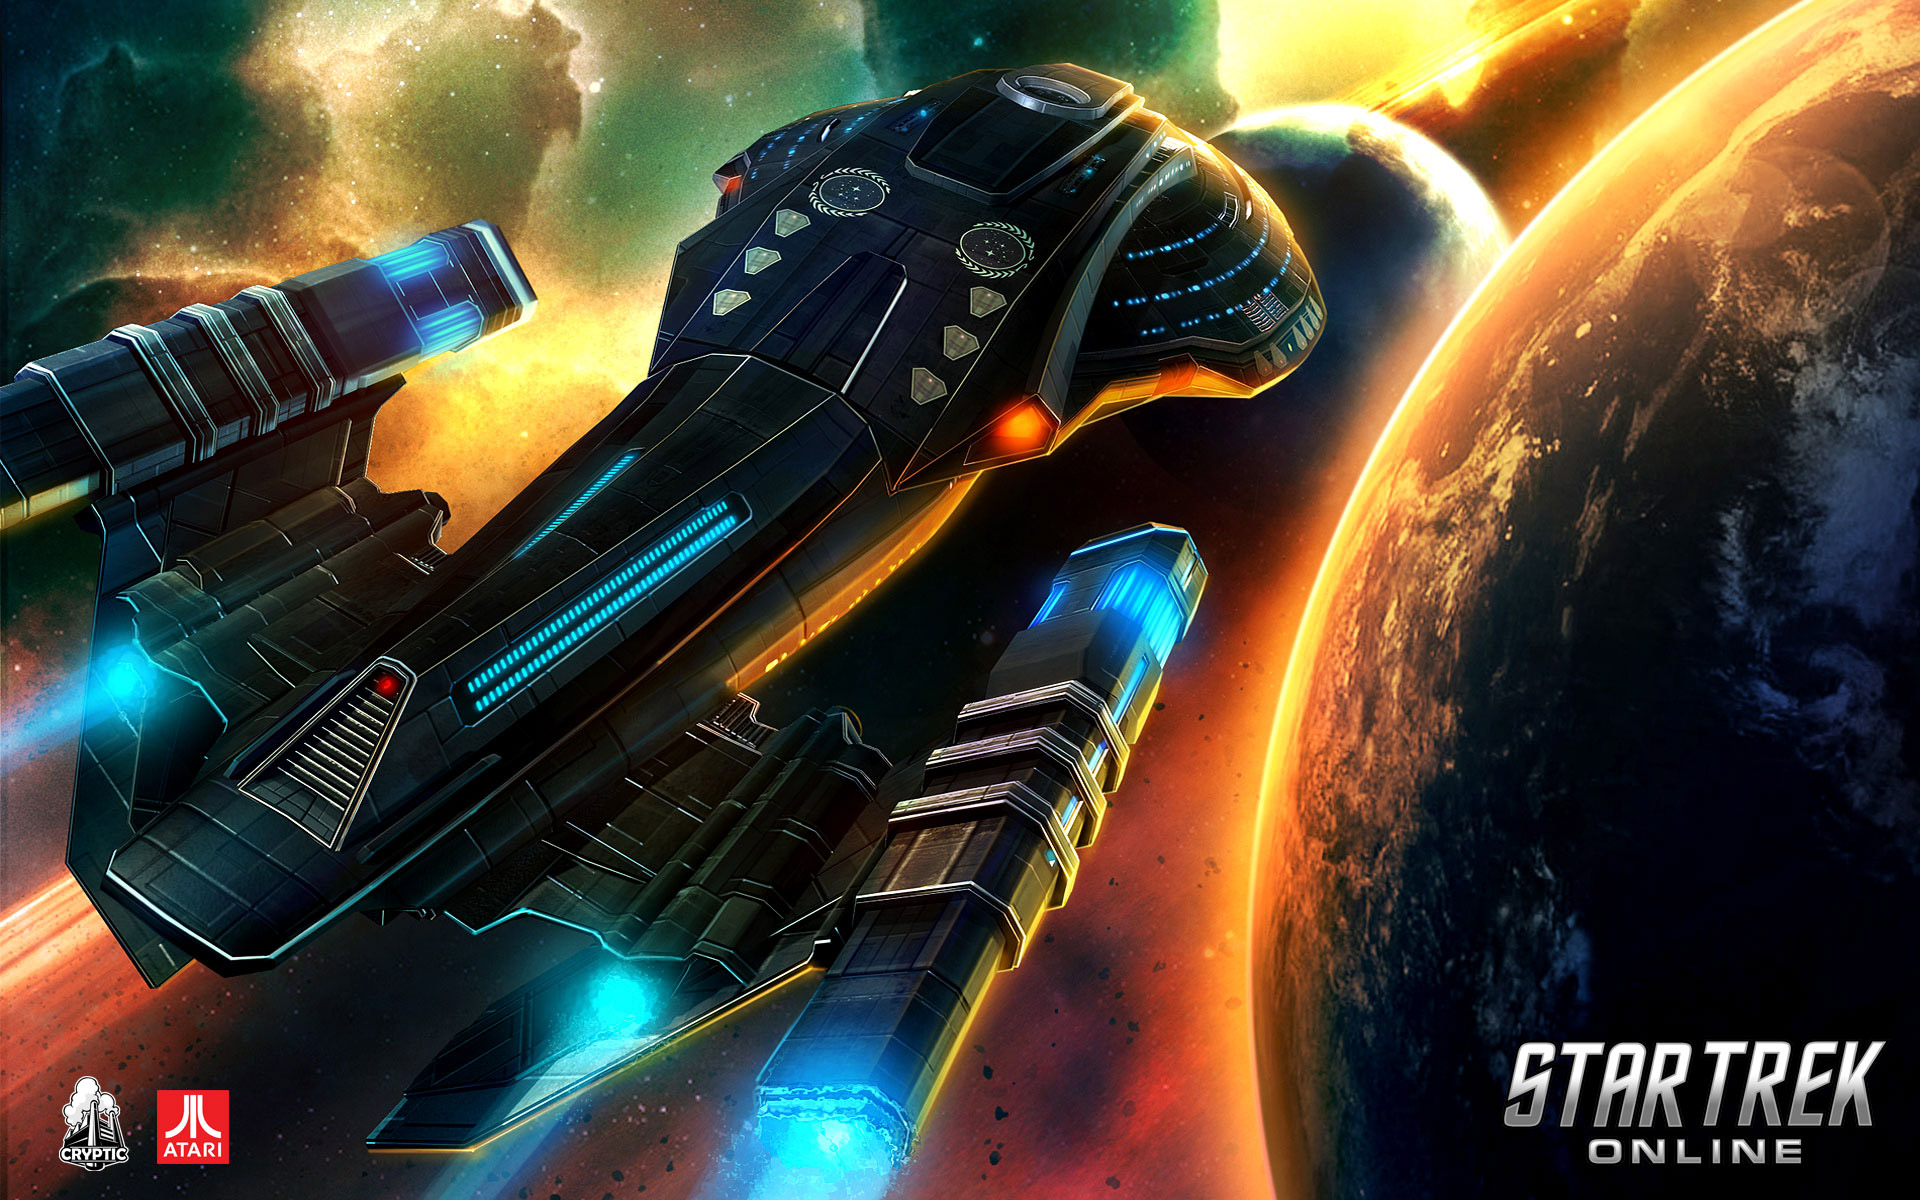 3d wallpaper online,action adventure game,pc game,shooter game,strategy video game,spacecraft